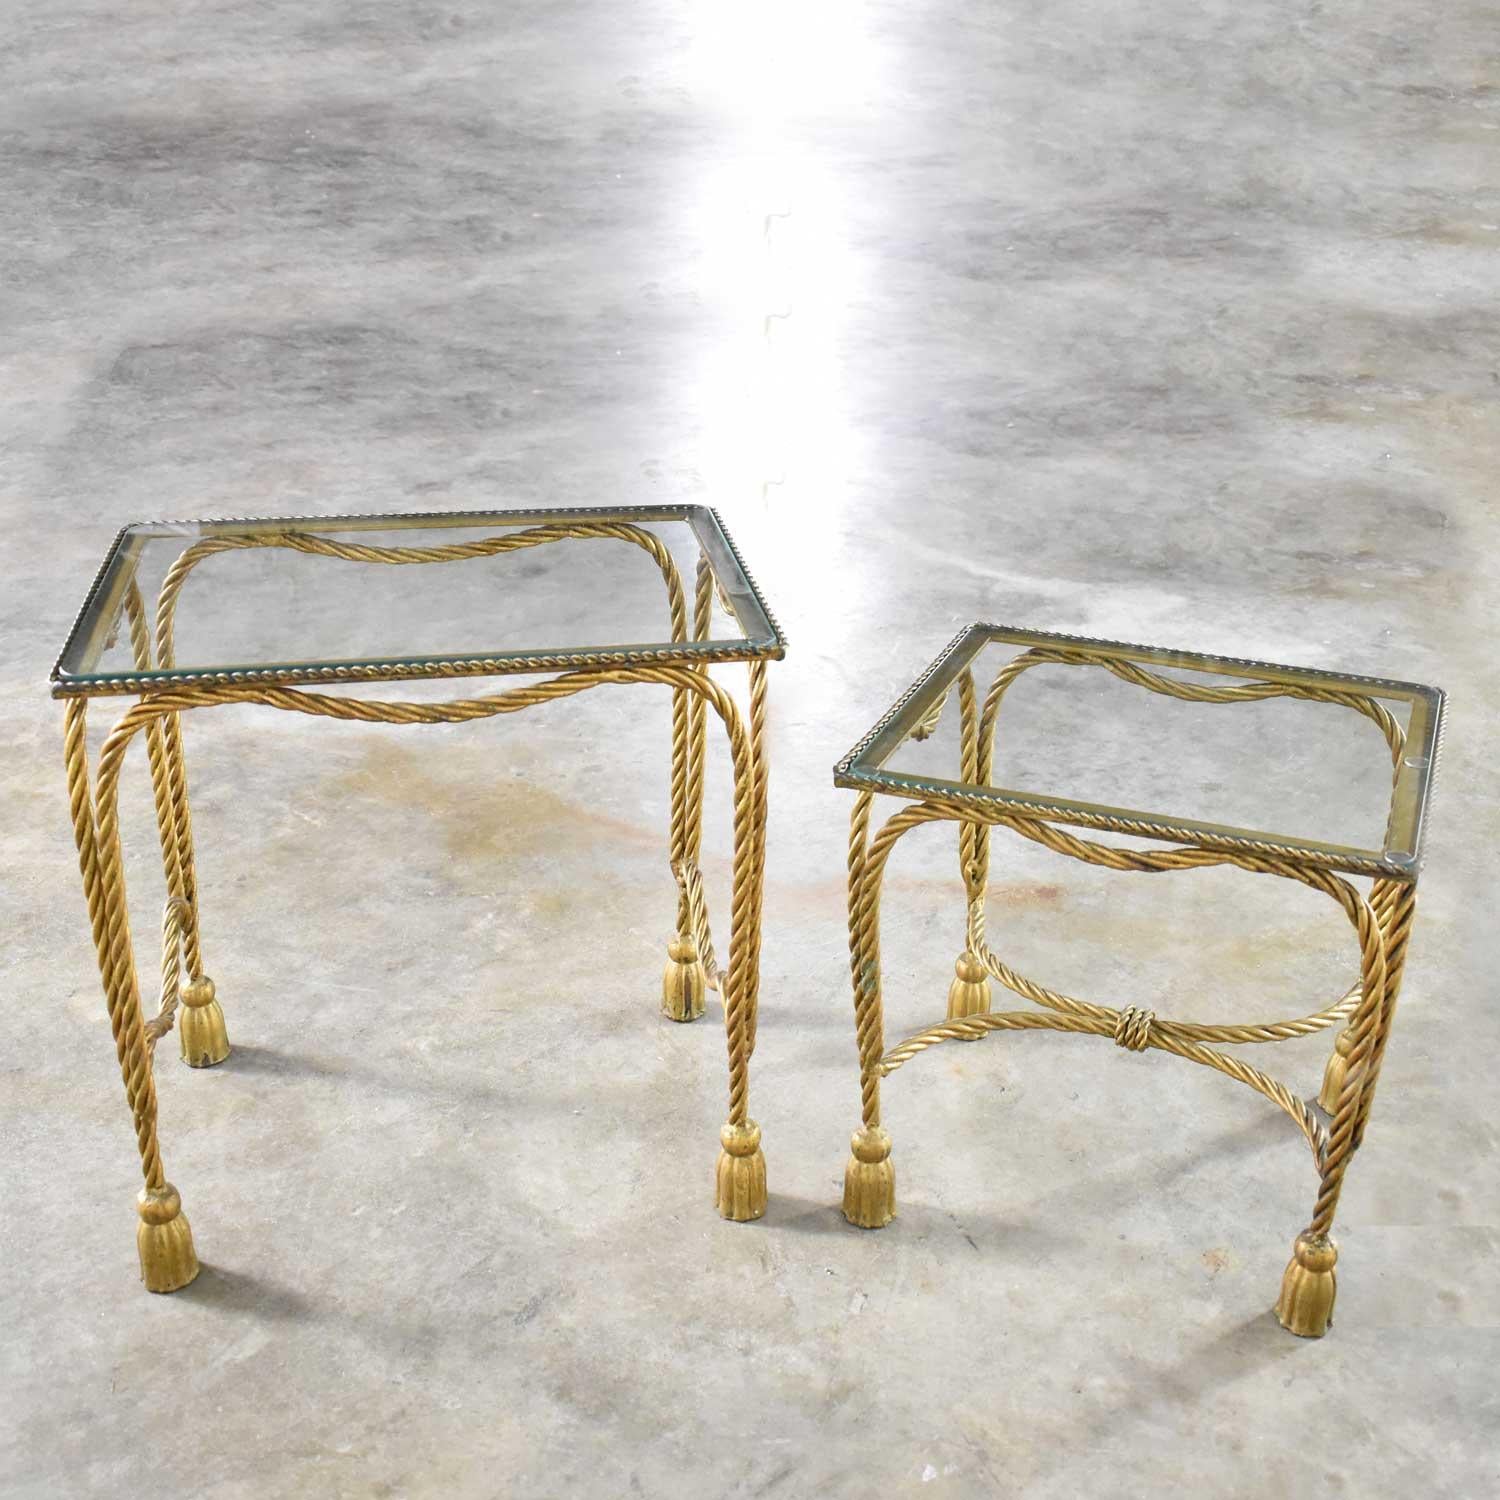 Set of Two Hollywood Regency Gilt Rope and Tassel Nesting Tables with Glass Tops 1